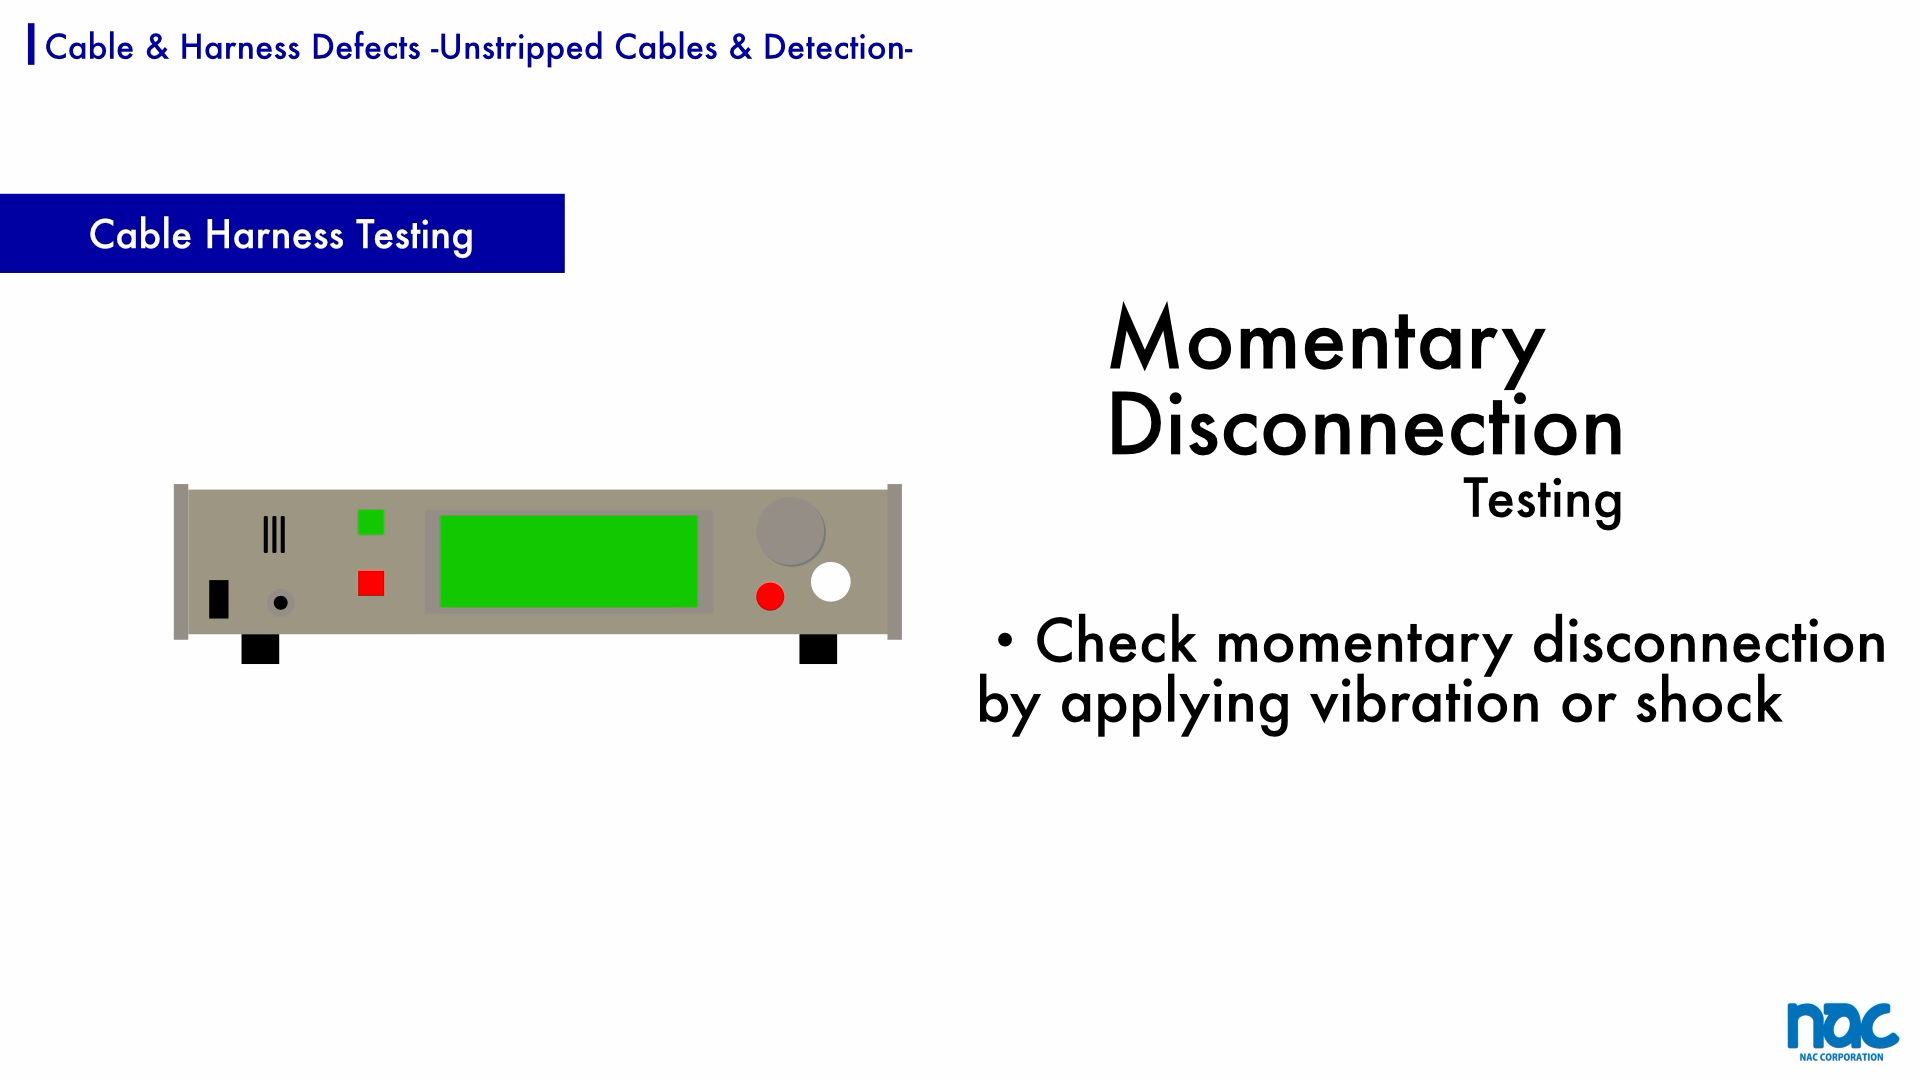 Momentary disconnection testing of the harness cable is required to confirm continuity under vibration and shock.